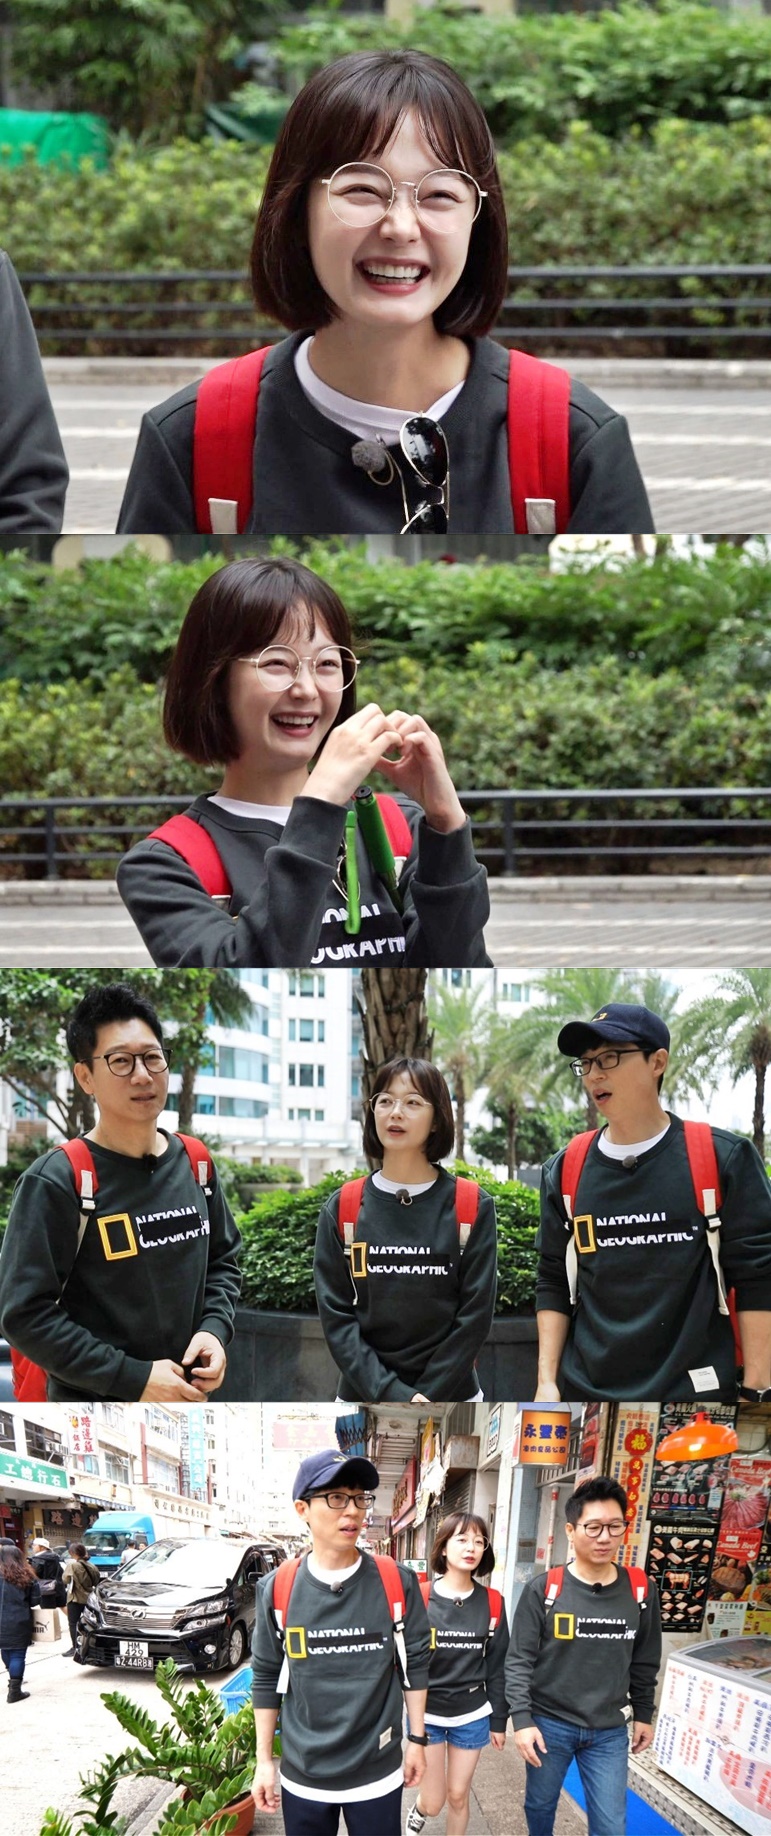 Actor Jeon So-min reveals his heart for marriageSBS Running Man, which will be broadcast on December 16, will be decorated with the second Mission Year-end Settlement race, which collects all Global Failure Missions and re-enters the mission challenger Eat Steaks on Locals by the Yoo Jae-Suk X Ji Suk-jin X Jeon So-min team after last week.Earlier, they hoped to succeed in Hong Kongs various food, but after Okinawa cotton hell, they fell into Hong Kong cotton hell and gave a big smile. Jeon So-min found Newlyweds who took a wedding shoot during the mission.Jeon So-min looked at Newlyweds who had no intention of wedding photography with a happy expression and suddenly shouted I want to marriage and embarrassed Ji Suk-jin and Yoo Jae-Suk.Jeon So-min said, I wished to be lucky because I could not marriage in Running Man.I do not think I can marriage. 